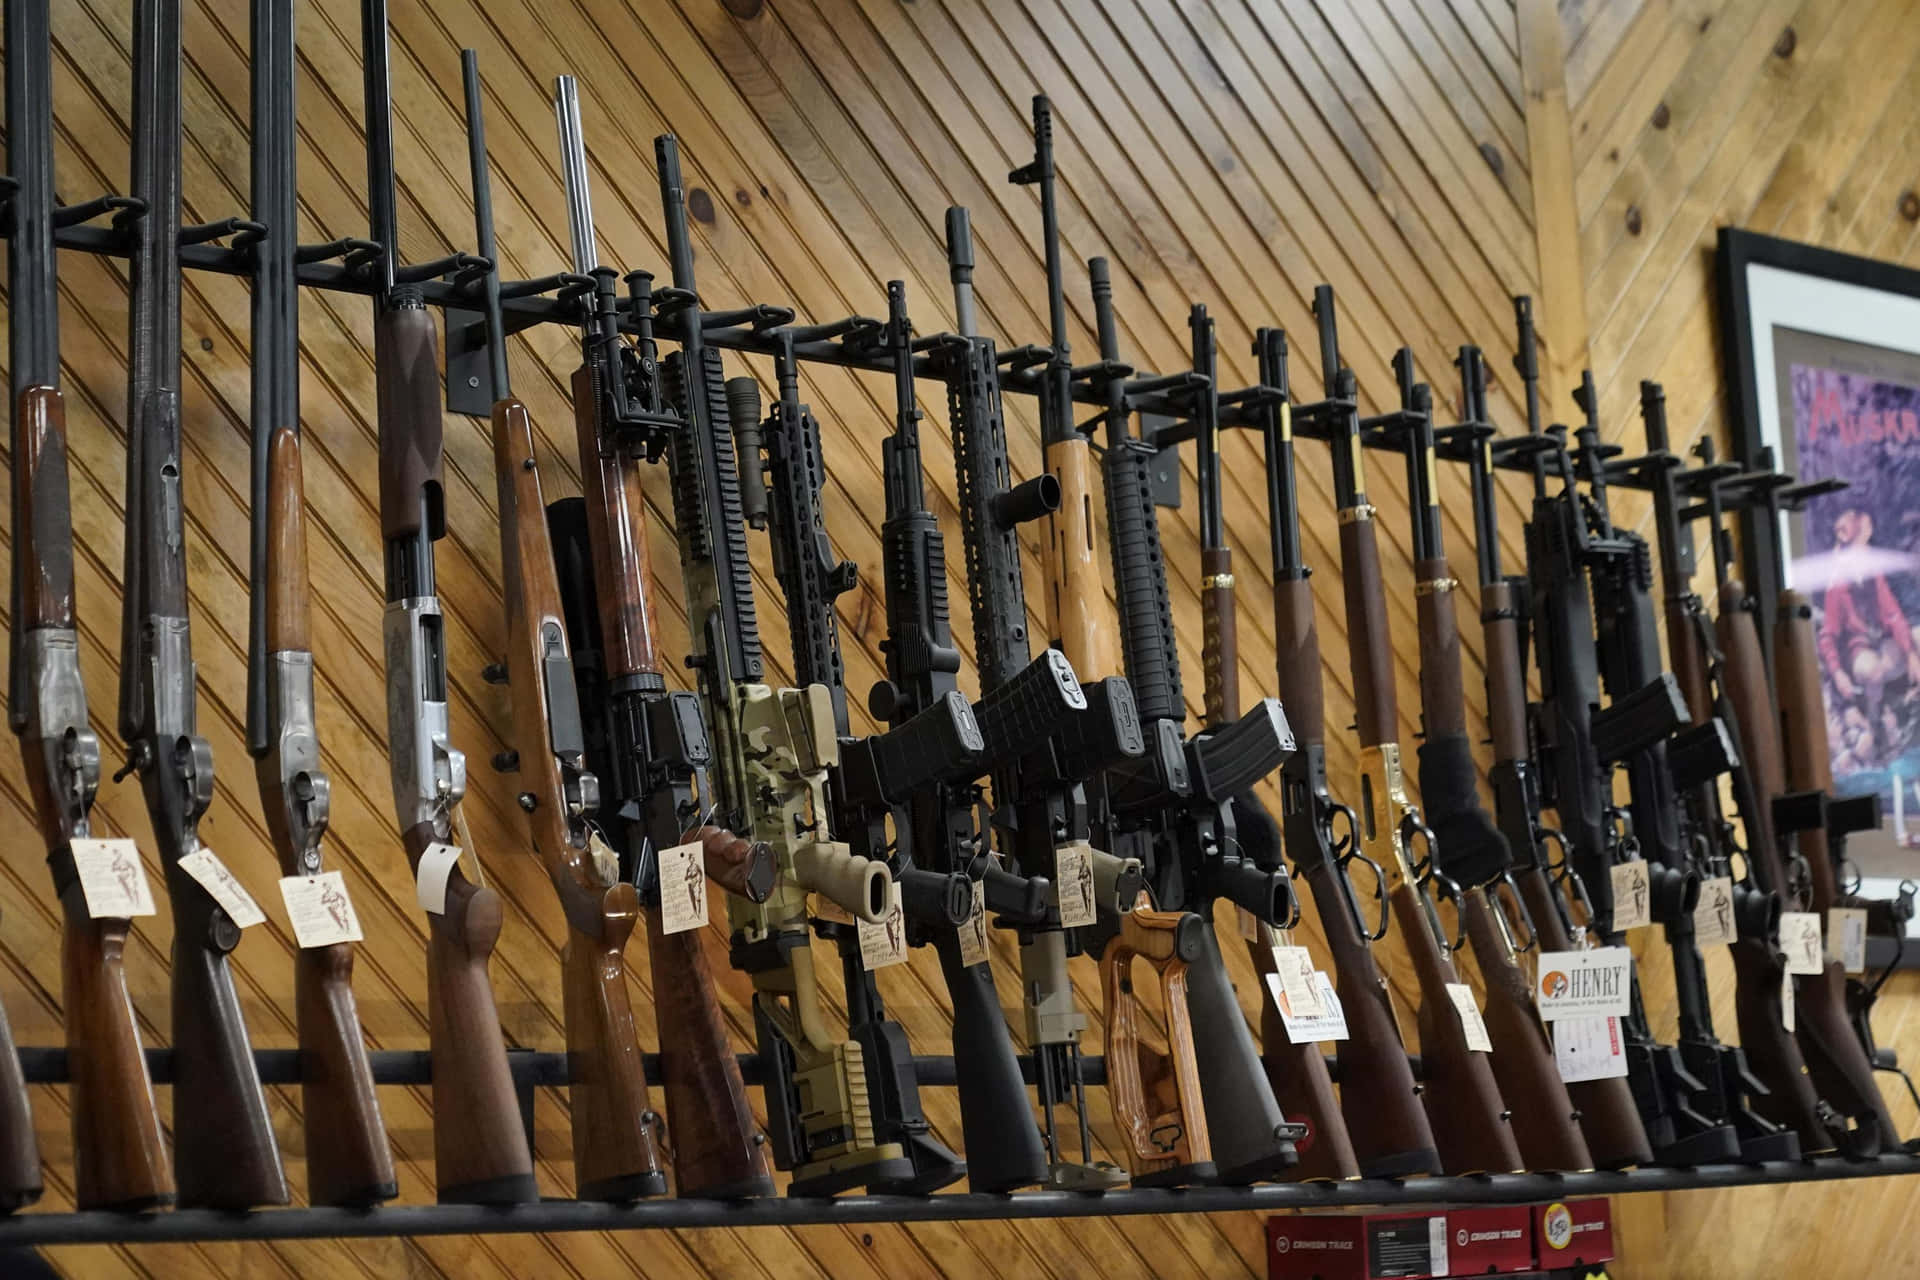 A Gun Store With Many Guns On Display